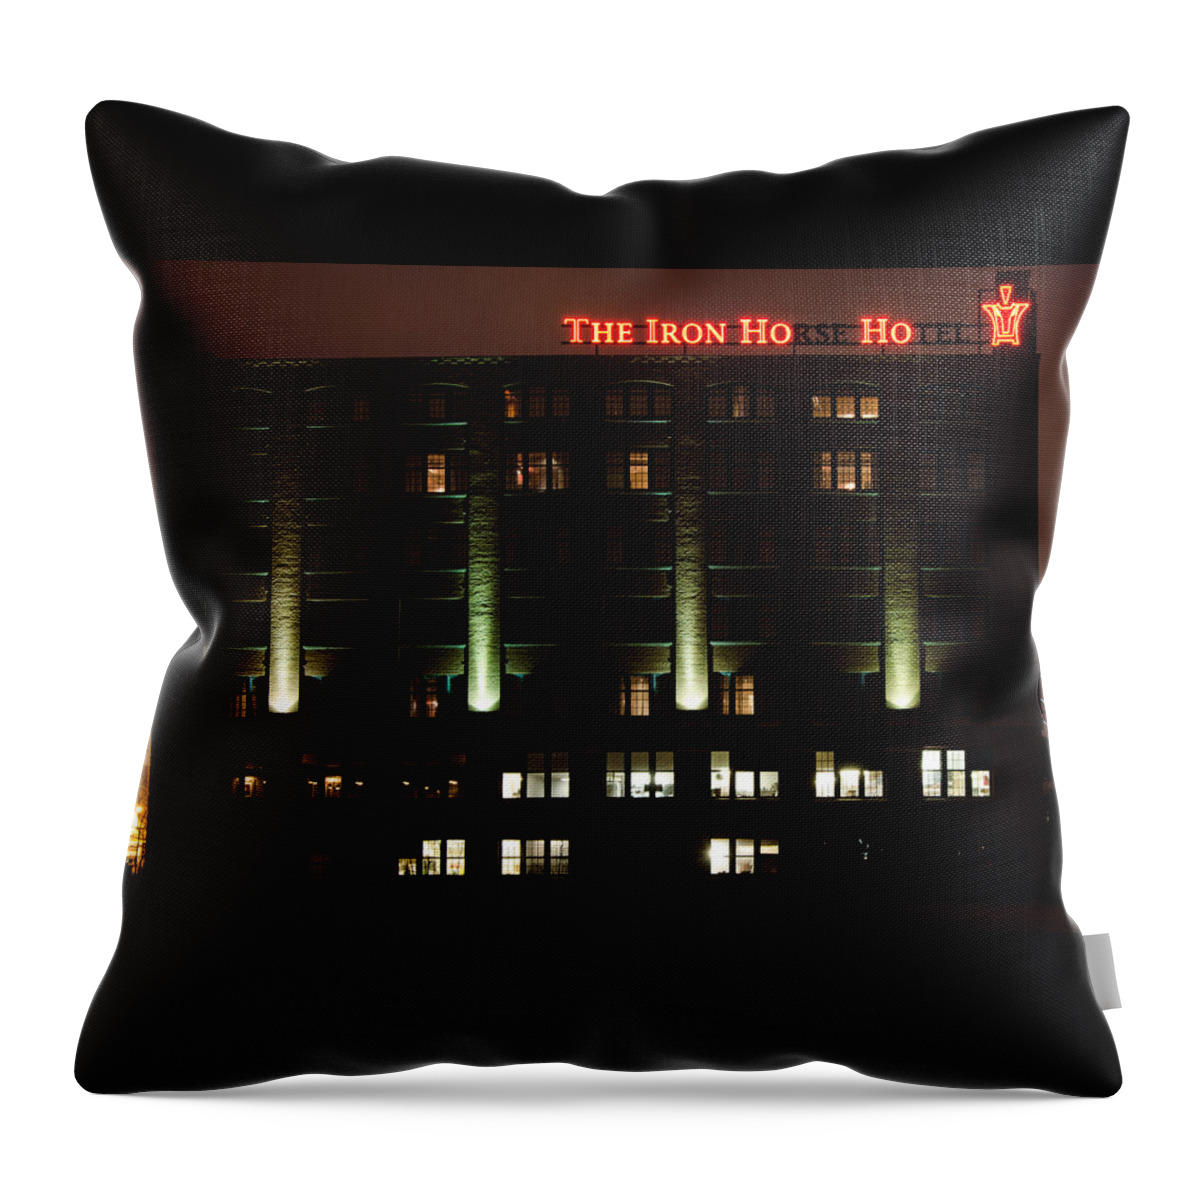 The Iron Horse Hotel Throw Pillow featuring the photograph The Iron Horse Hotel by Susan McMenamin